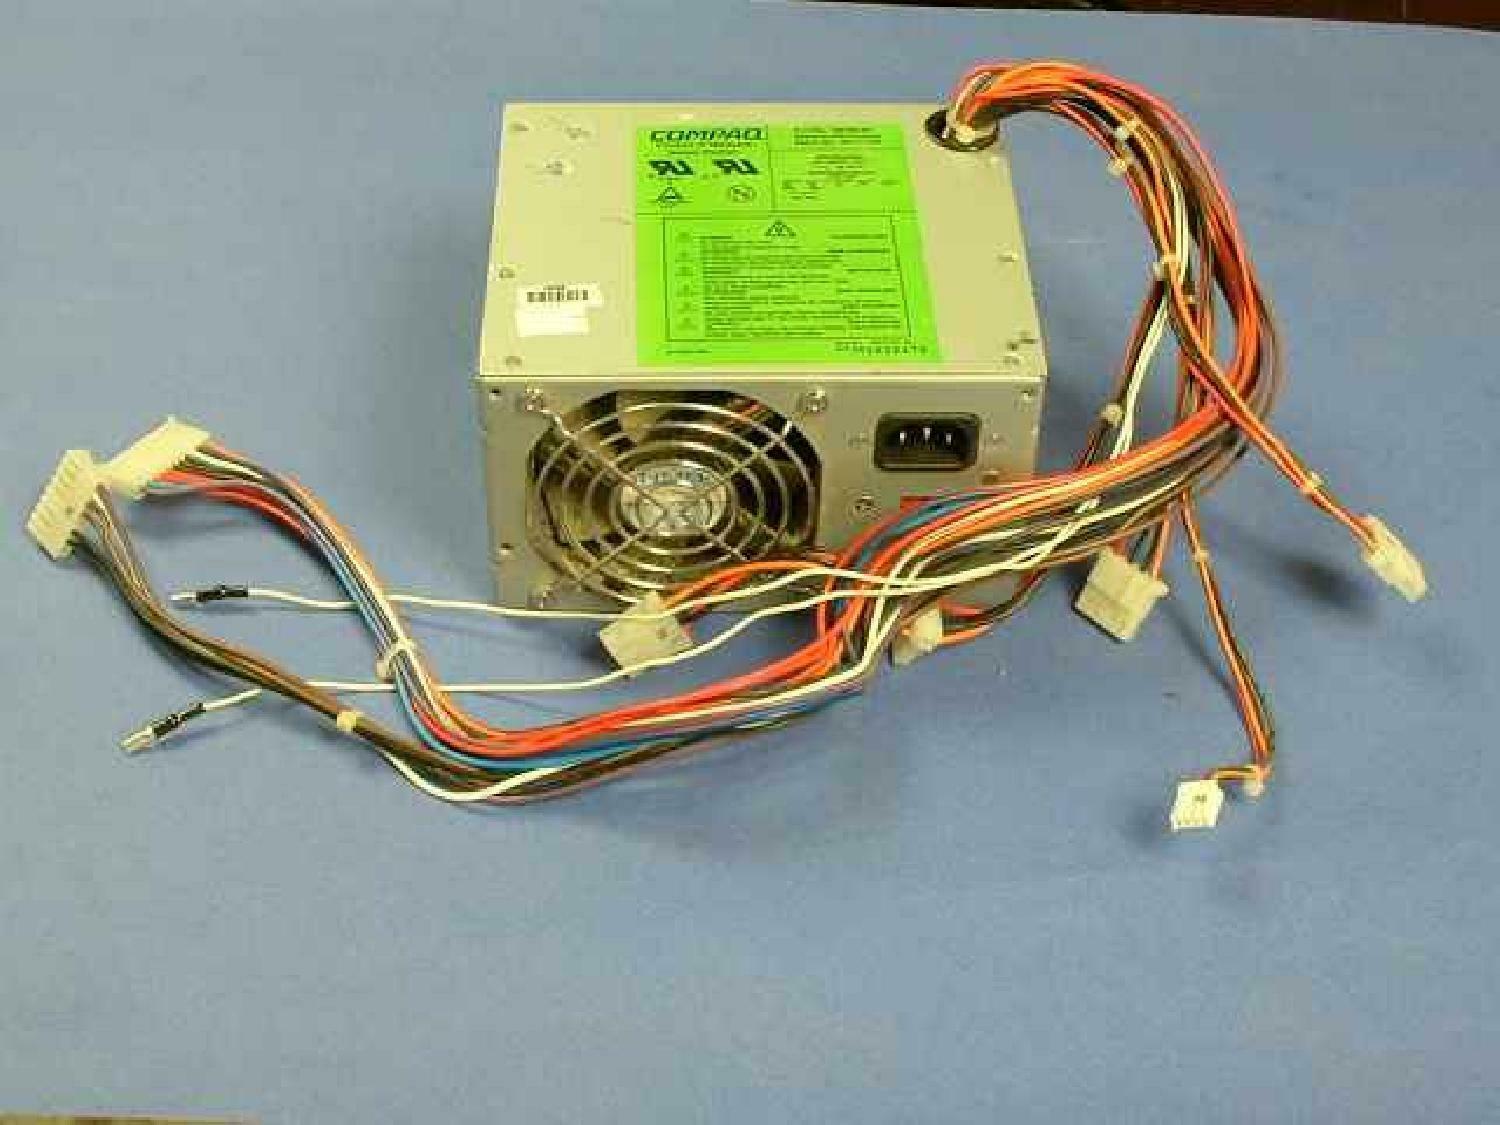 PS2021 184737 001 PS 5151 4D 184737 001 power supply 145 watts steady state no longer supplied